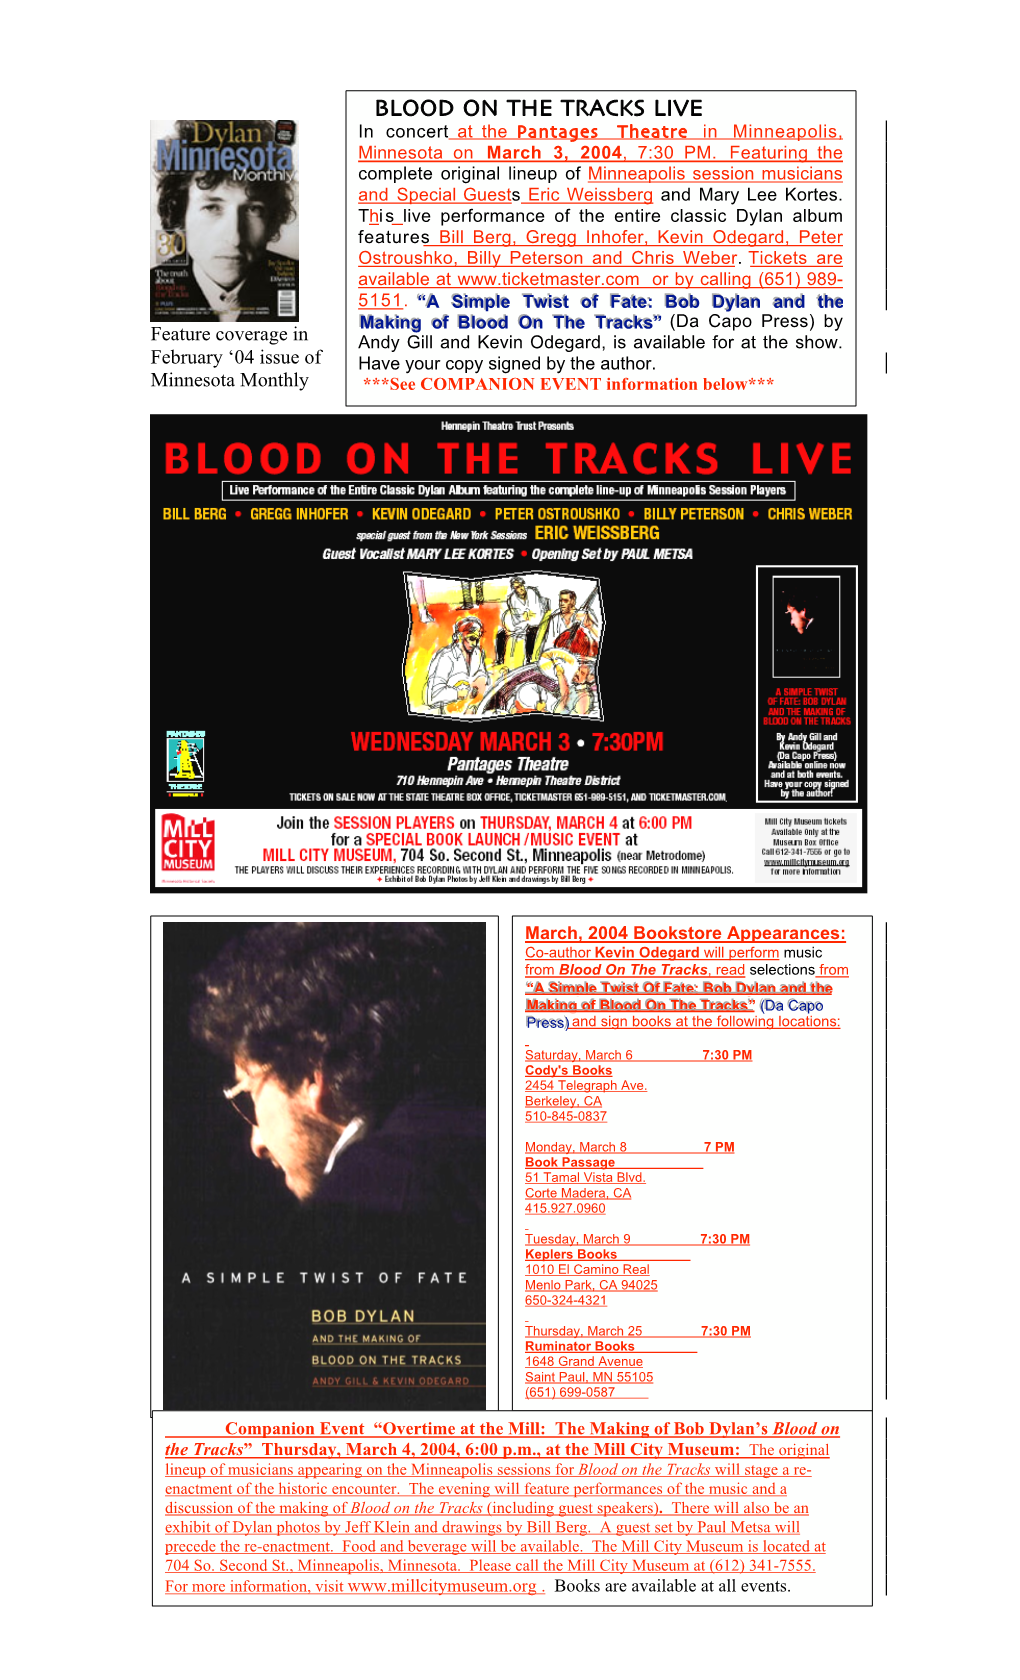 BLOOD on the TRACKS LIVE in Concert at the Pantages Theatre in Minneapolis, Minnesota on March 3, 2004, 7:30 PM